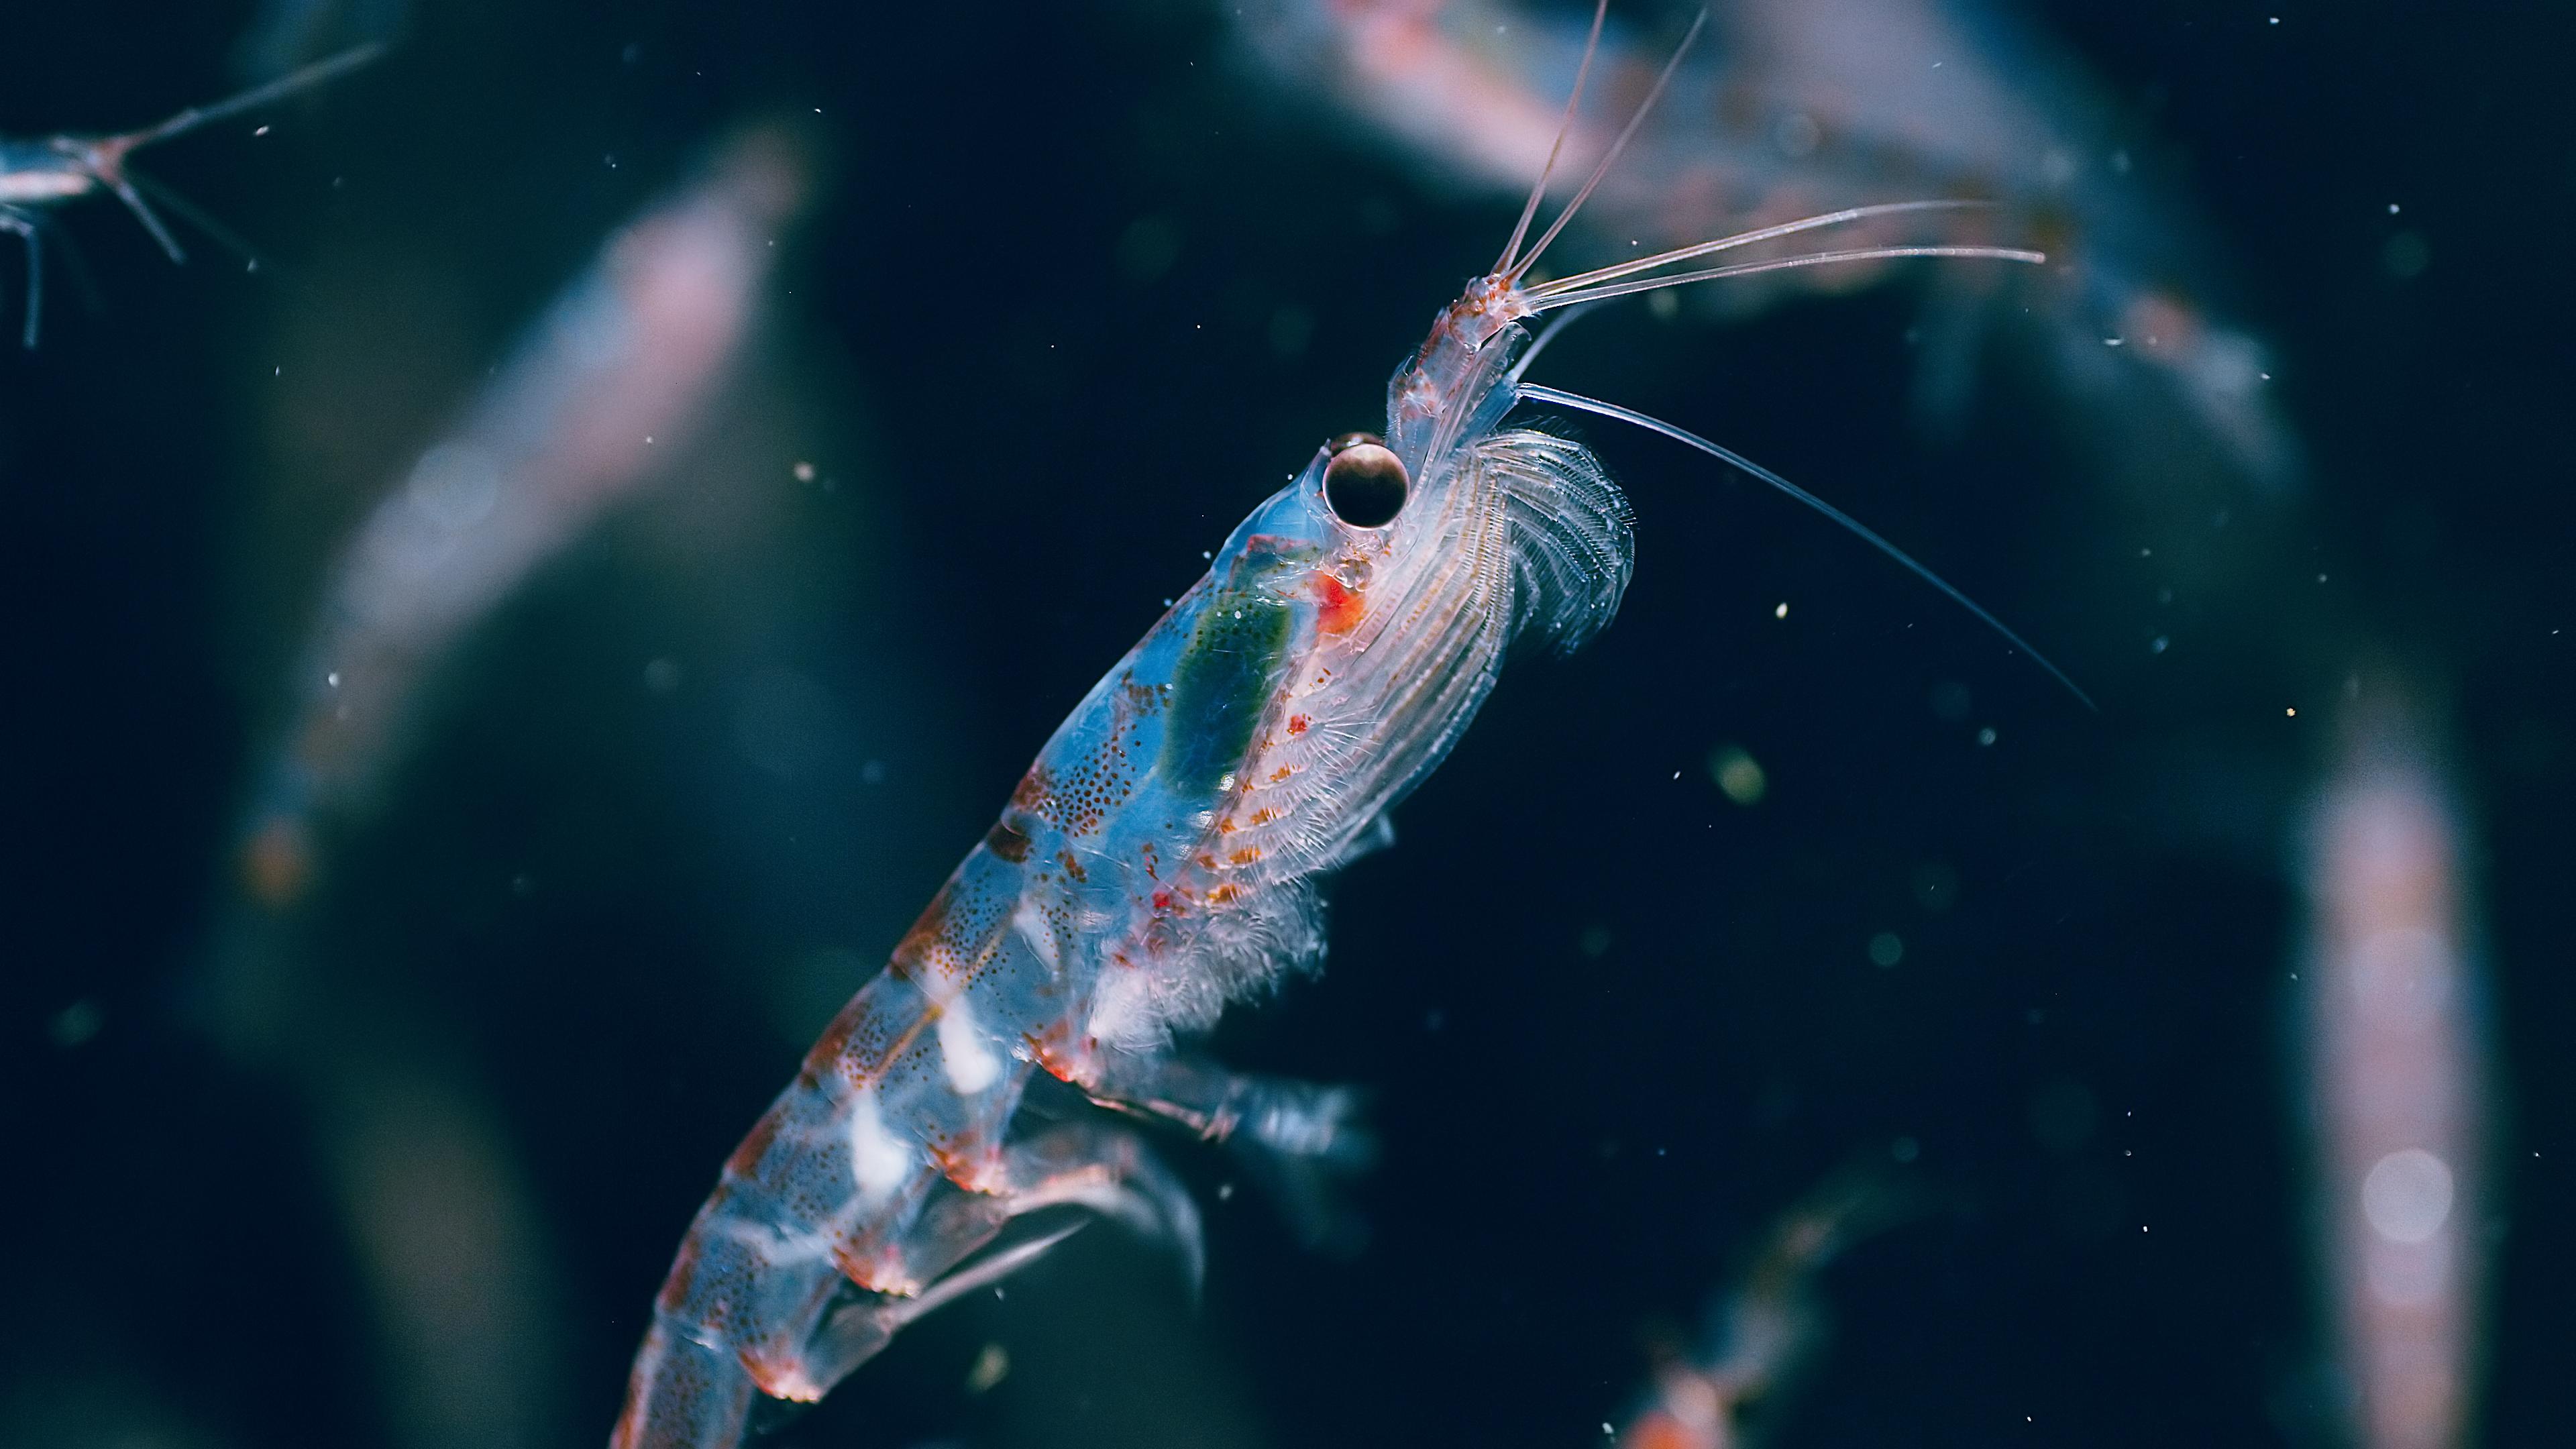 The Hong Kong Space Museum is screening a new 3D dome show, "Antarctica 3D", at its Space Theatre starting from April 1 (Monday) to lead audiences to explore the Antarctica. Photo shows a Antarctic krill. (Photo source: BBC NHU)